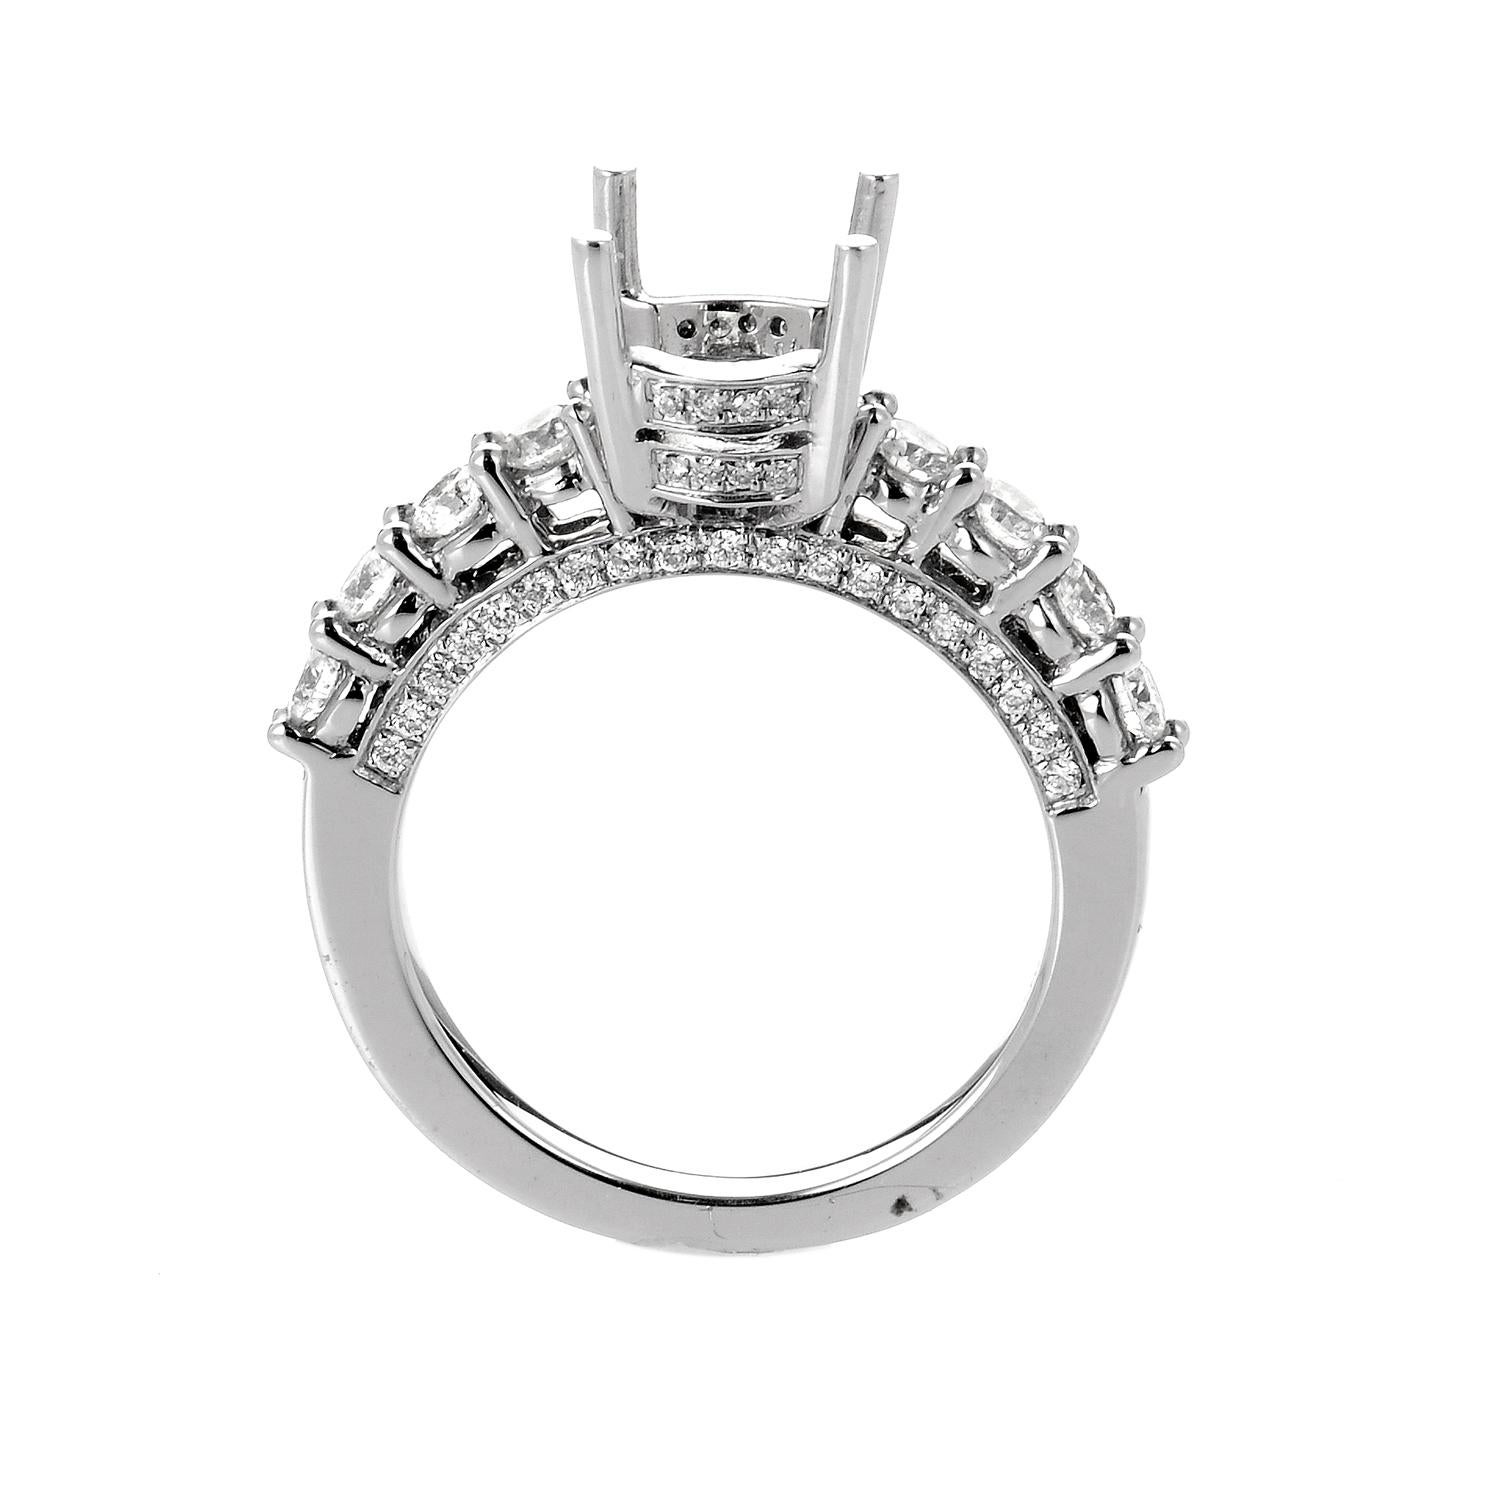 A high quality line of micro-pave diamond fashion and bridal jewelry,  offers a stylish designer look with a timeless, classic edge. Stunningly elegant,  brand jewelry encrusts sparkling white diamonds on various colors of 18K gold or platinum. 18K